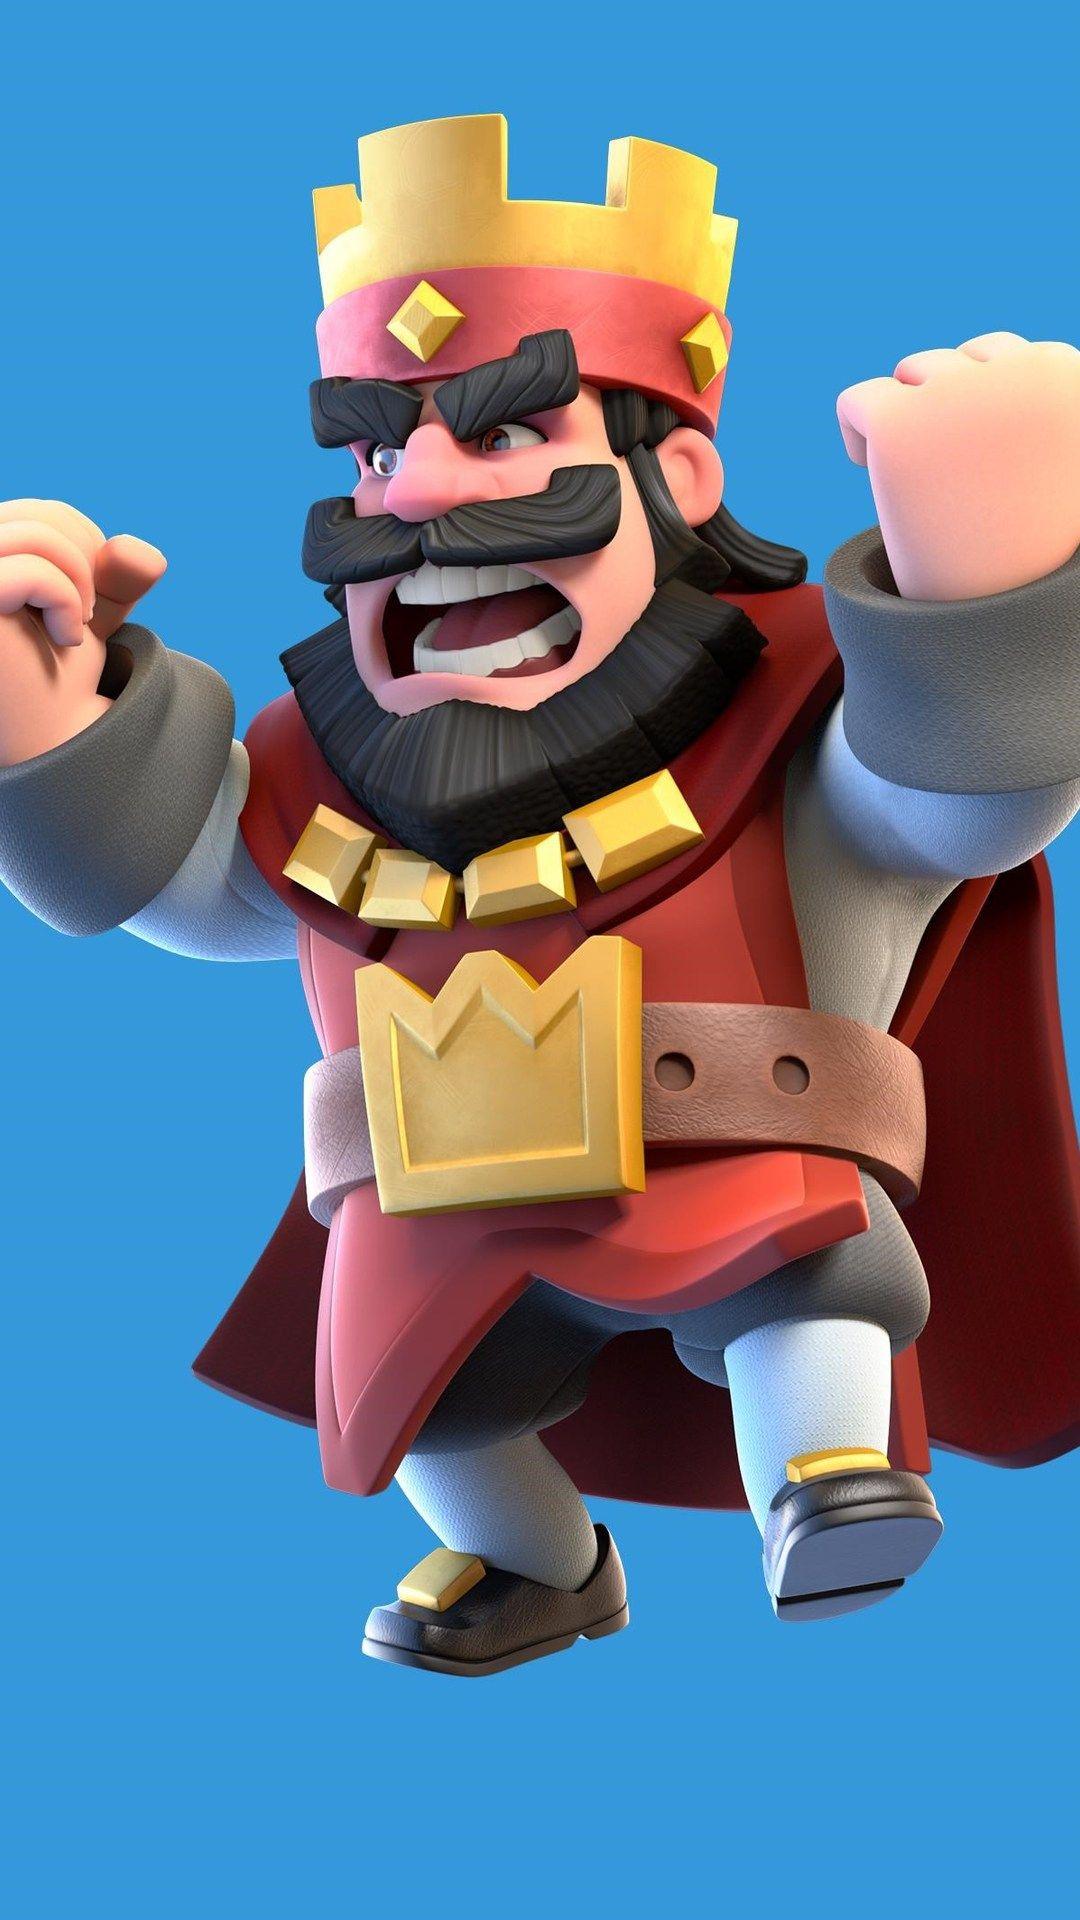 Showing Media & Posts for Funny clash royale king